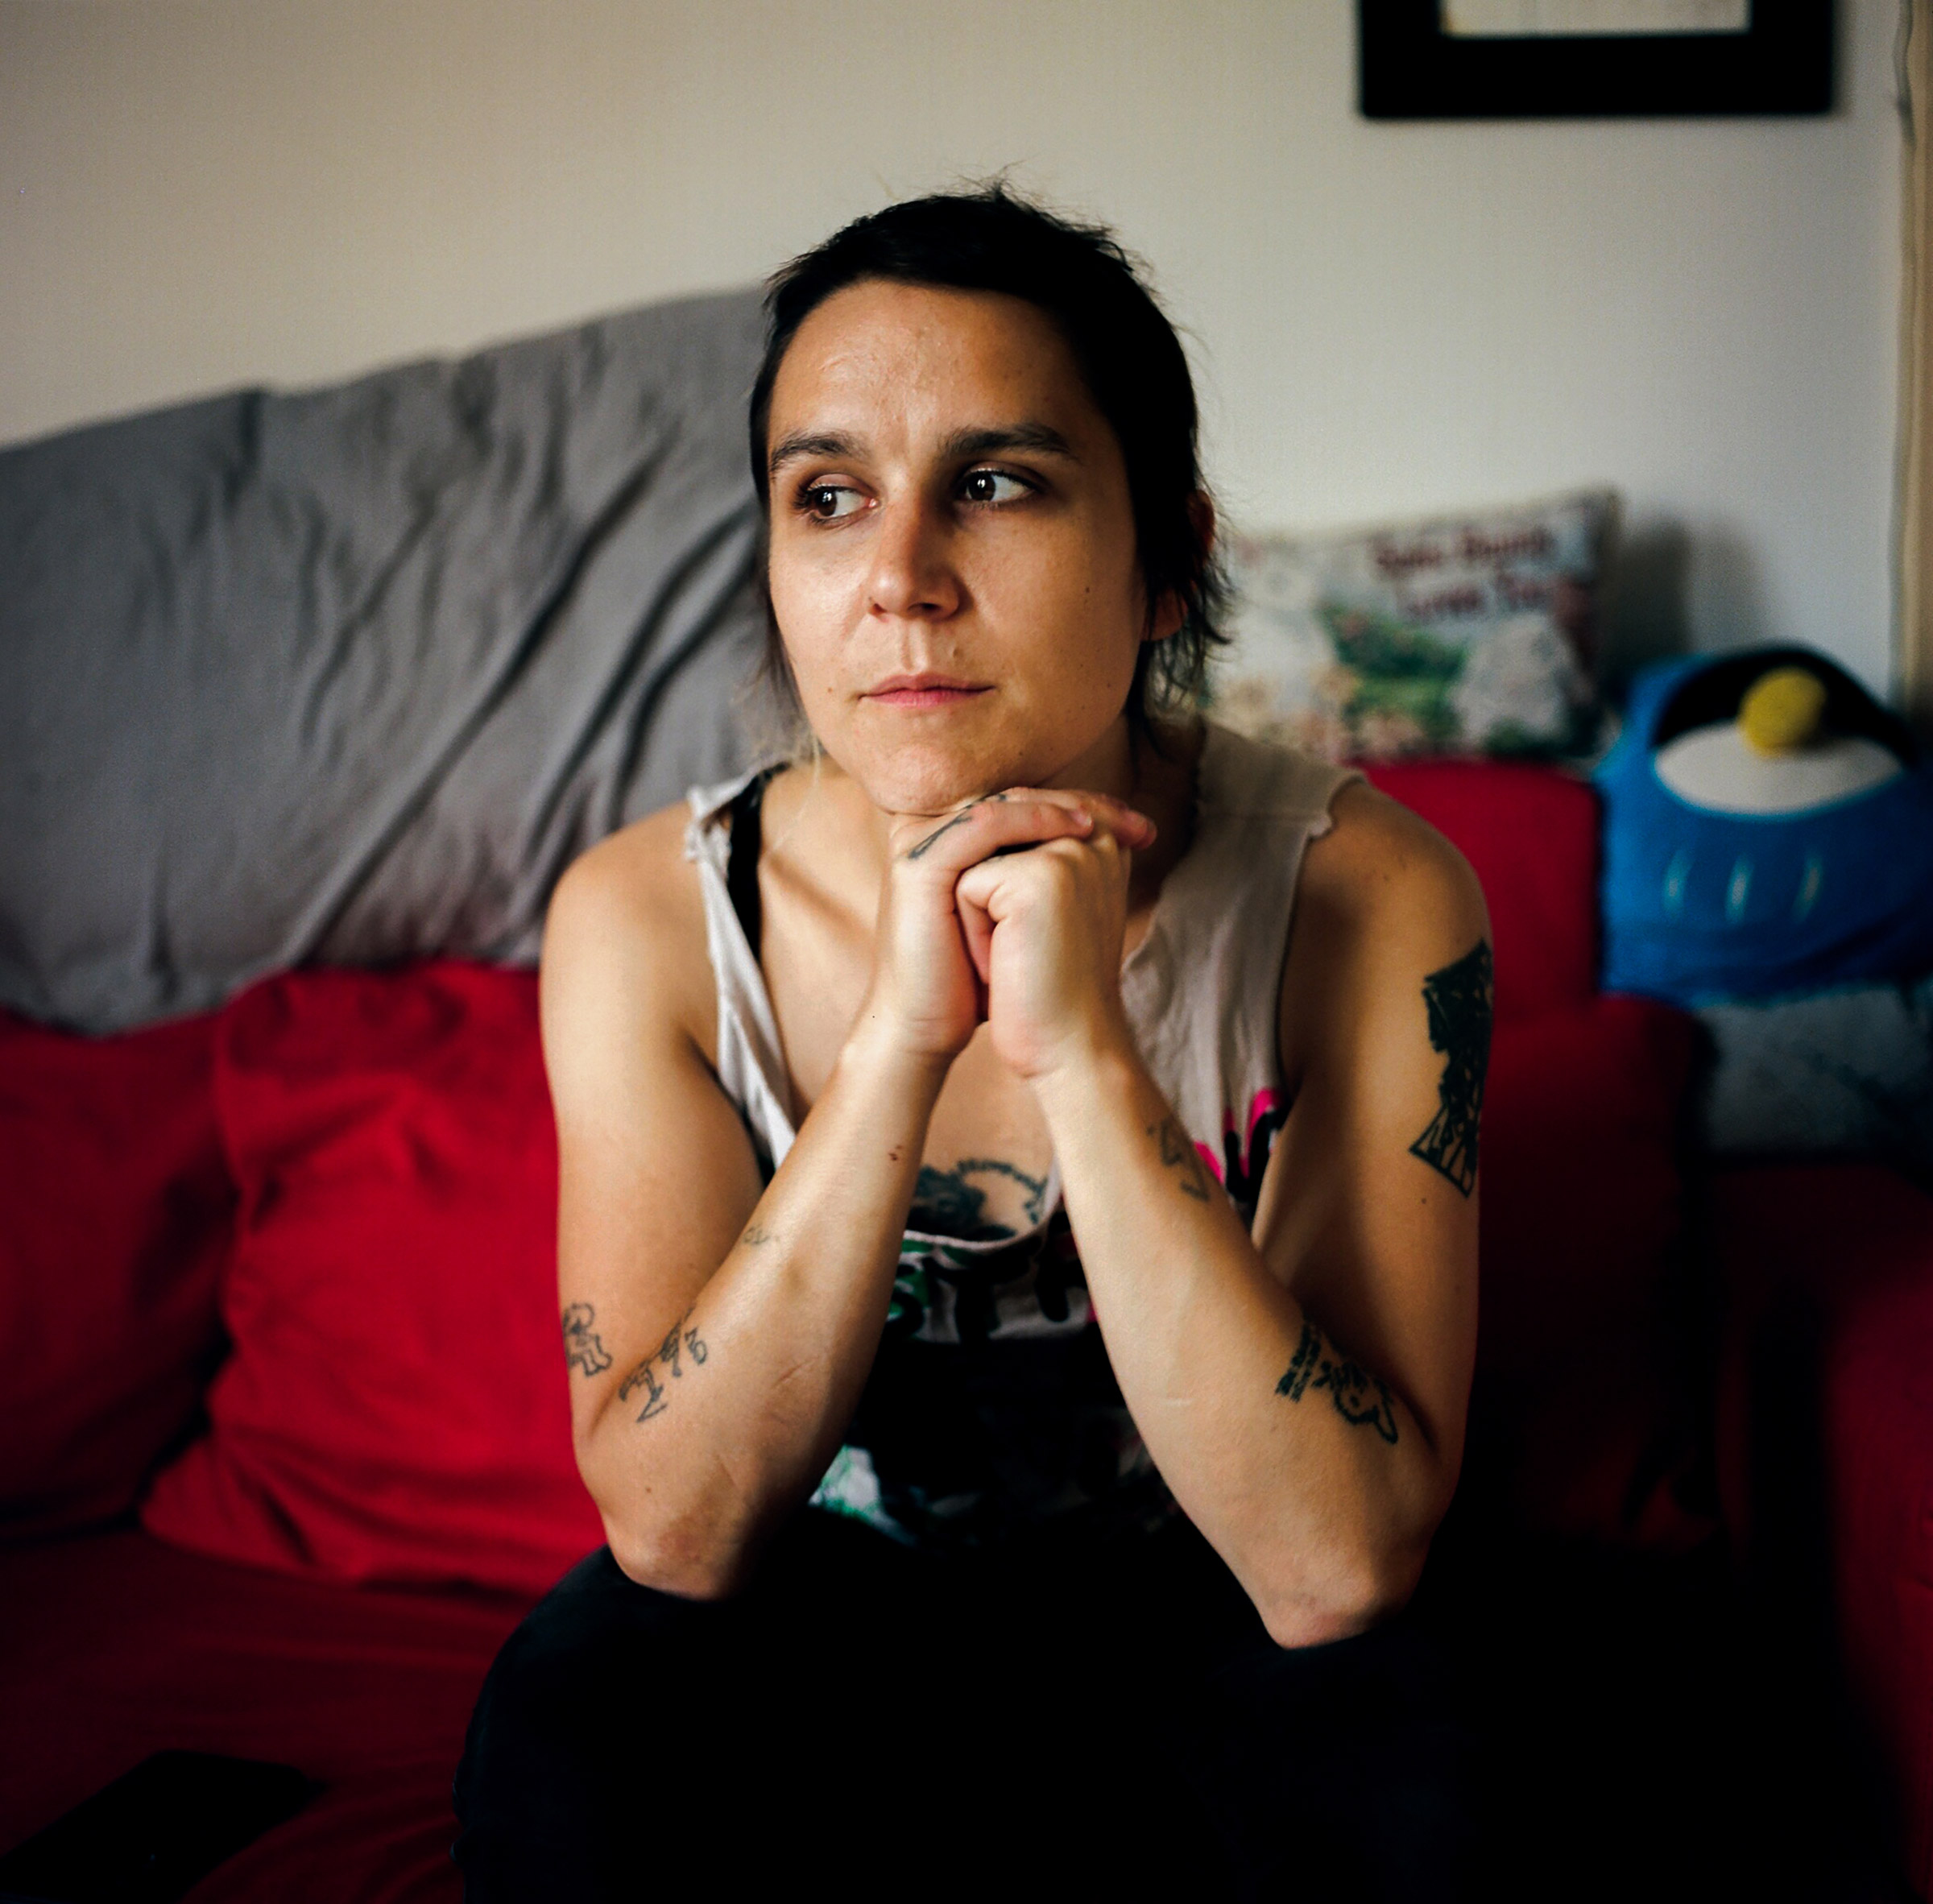 Eris Nyx, co-founder of The Drug User Liberation Front, in her home in Vancouver, B.C. on Aug. 1, 2021. (Jackie Dives)